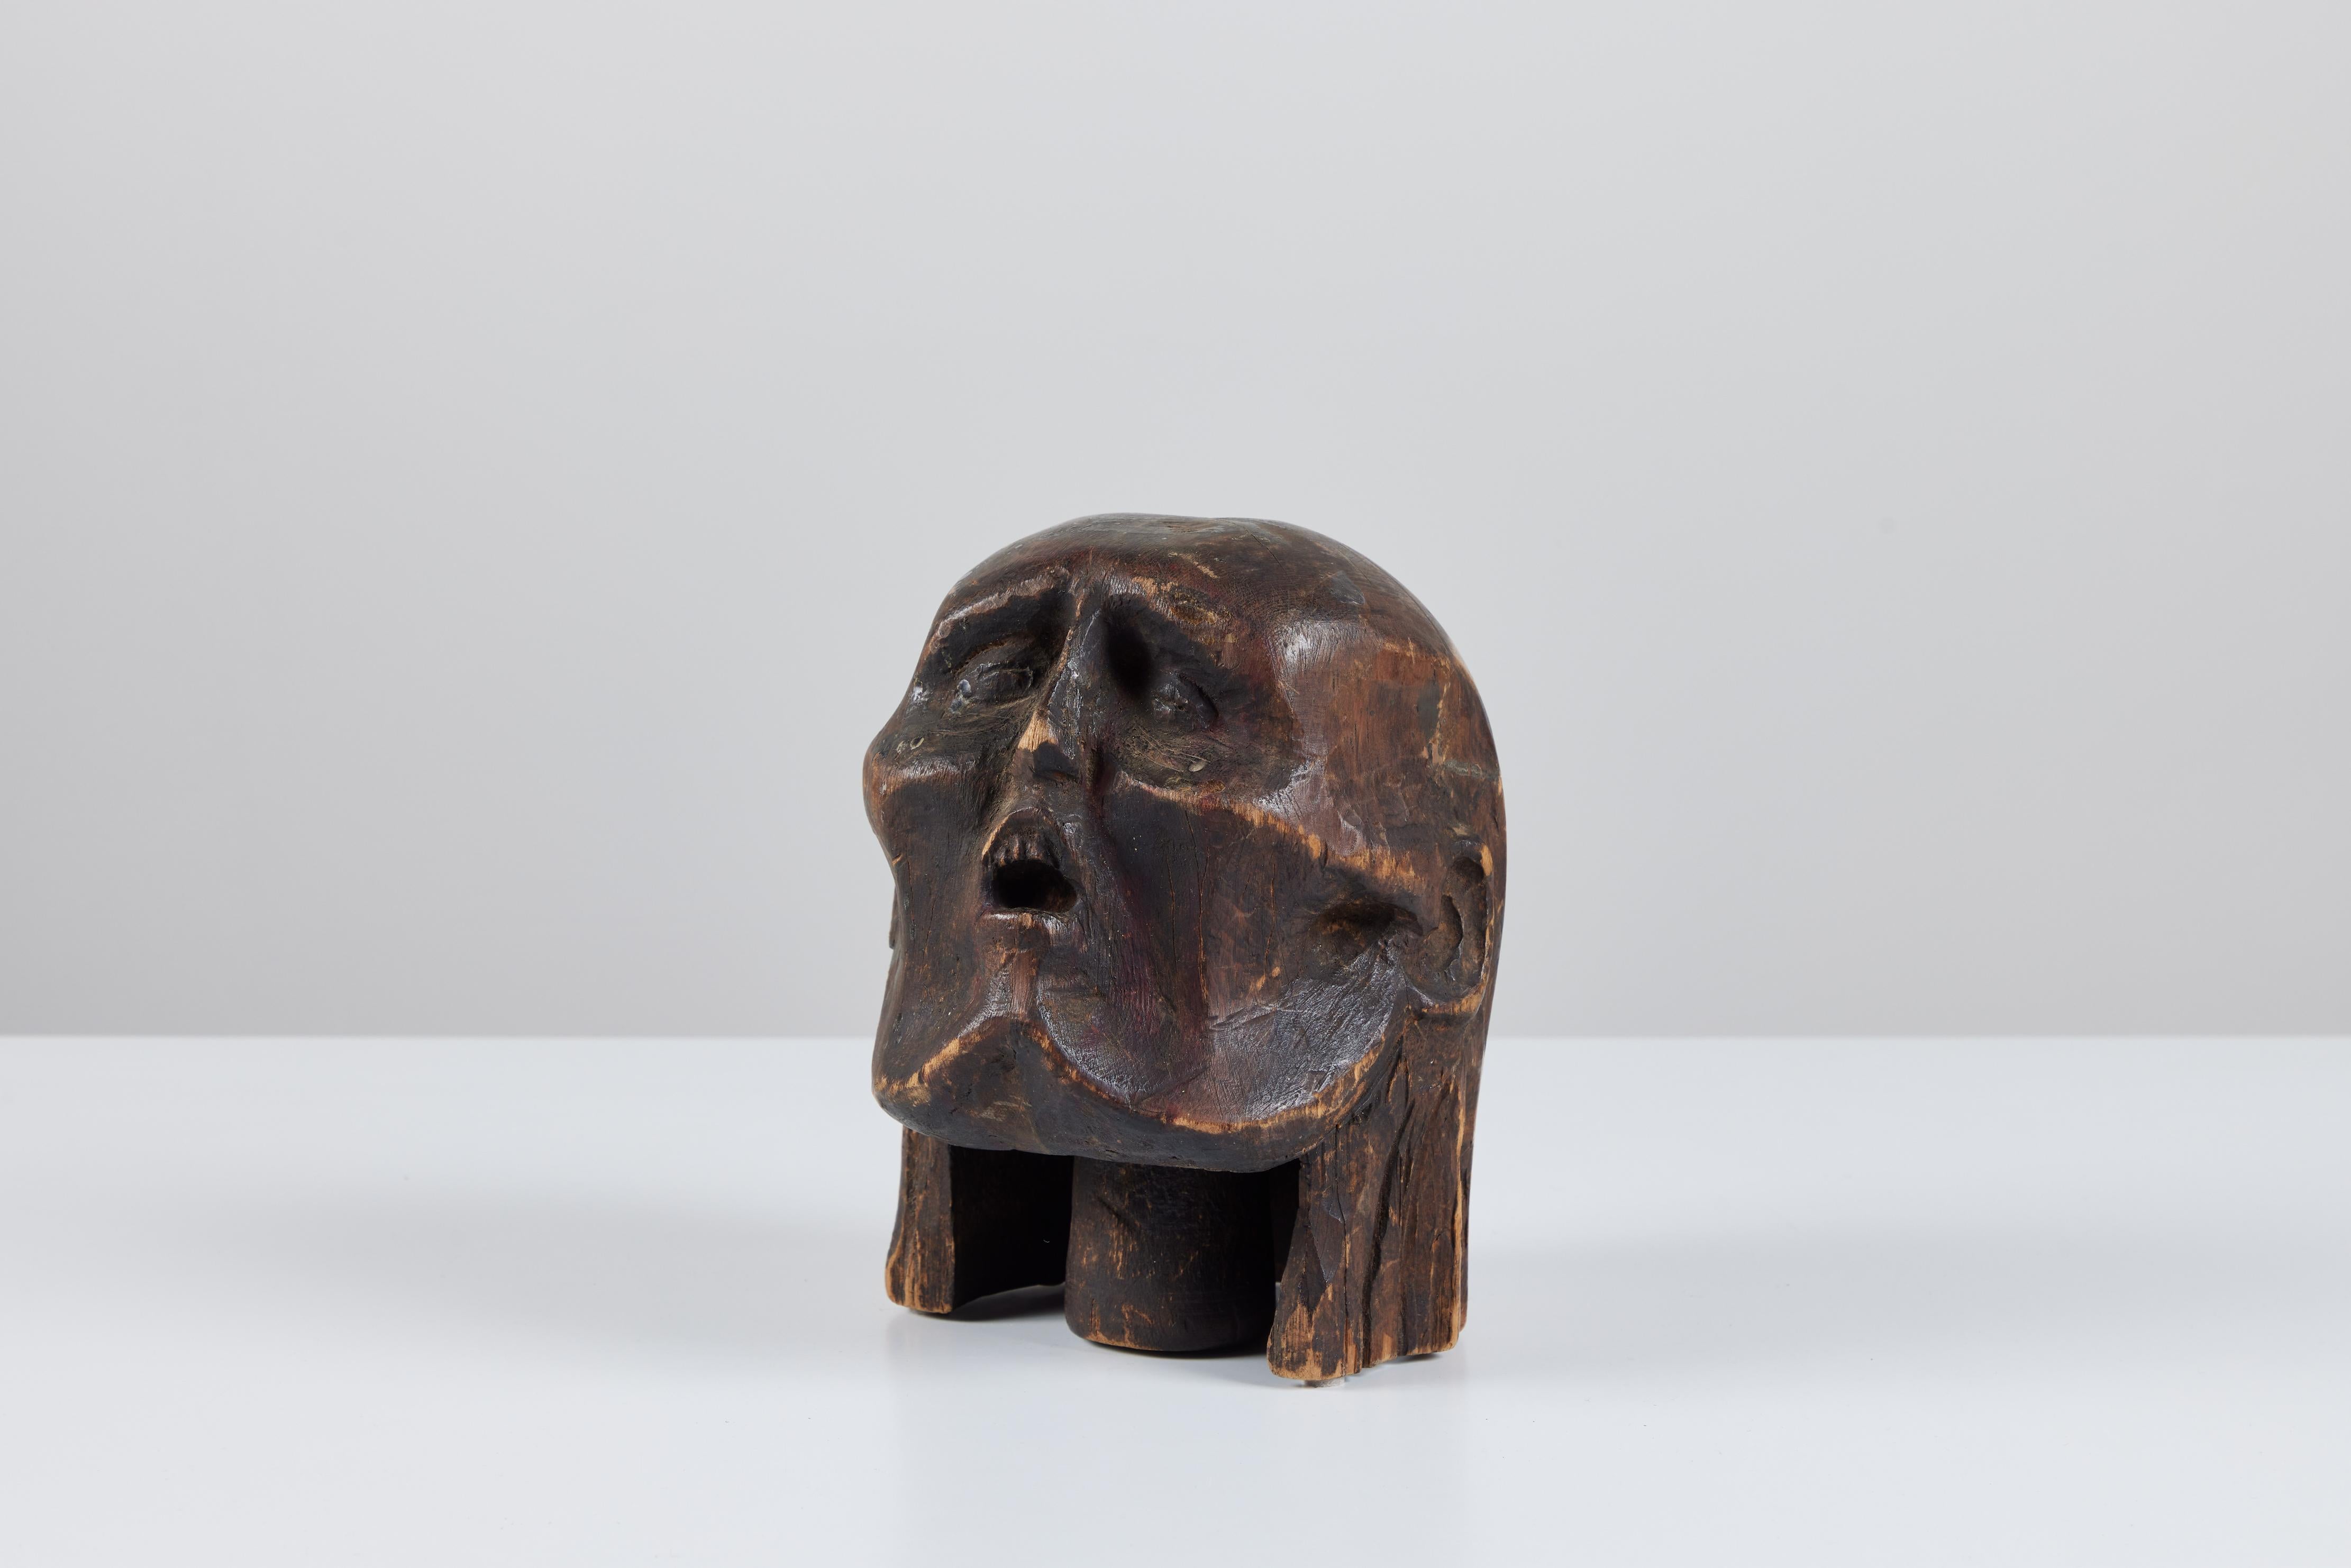 Hand-Carved Wooden Head Sculpture